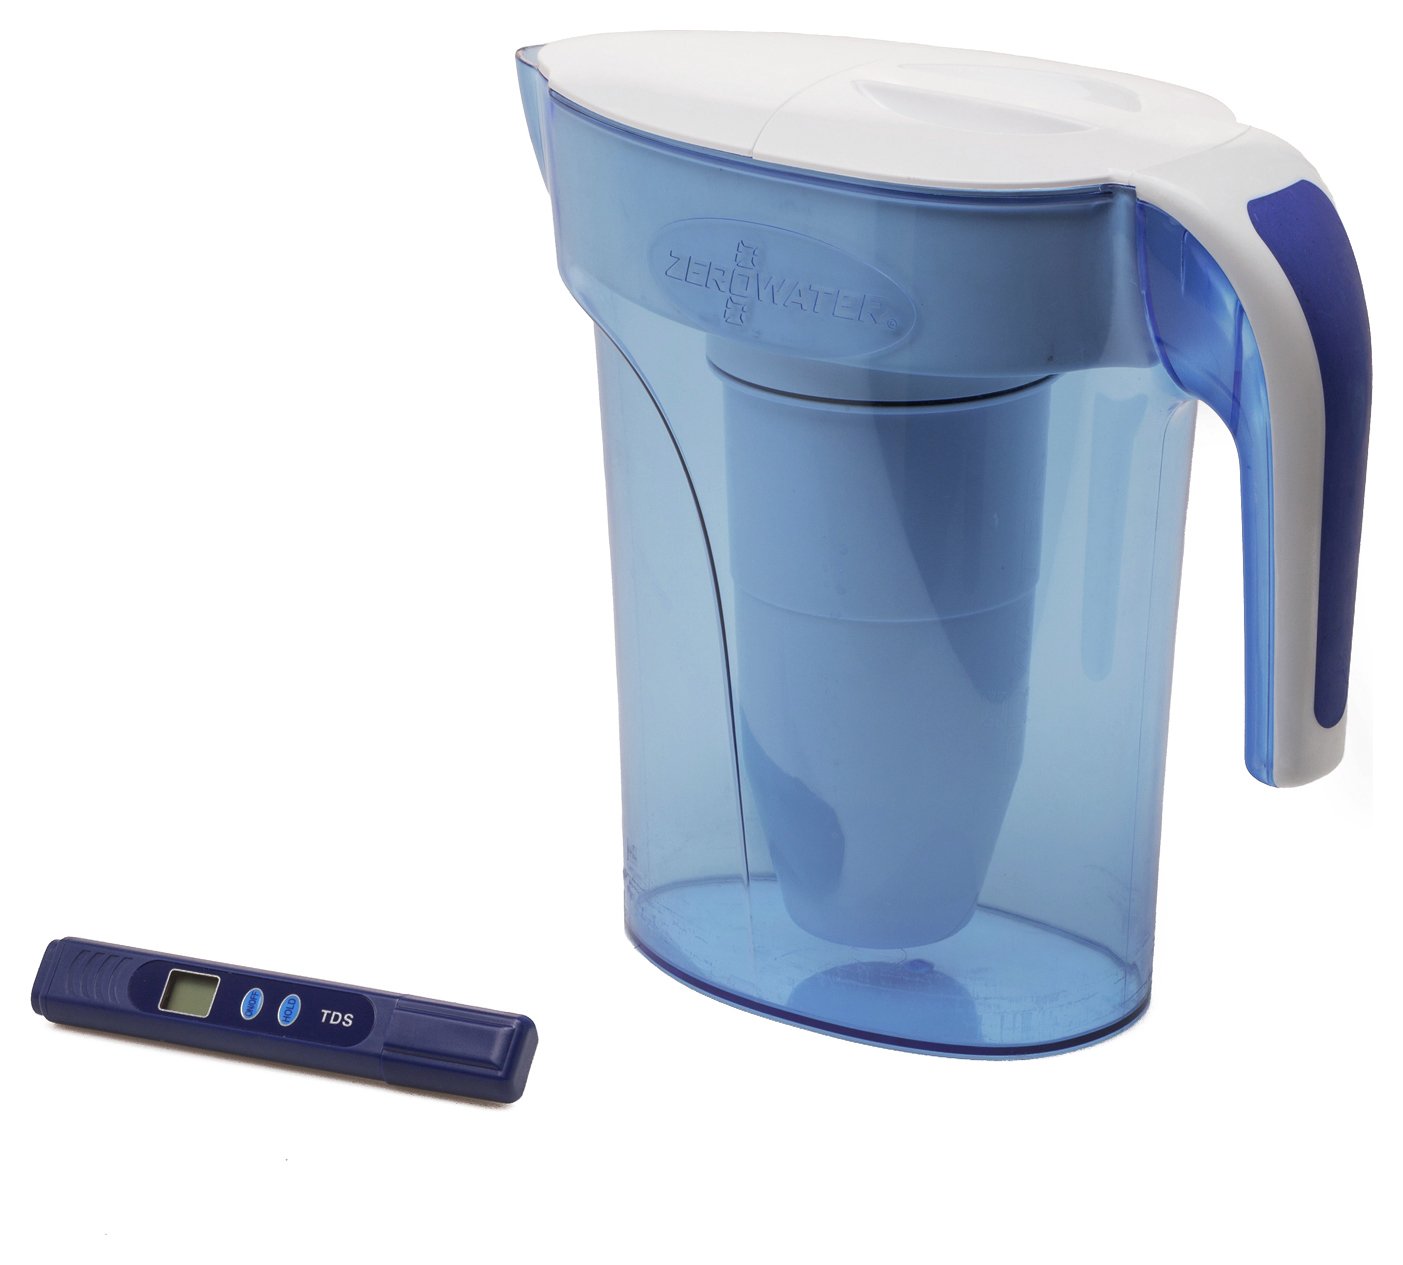 Zerowater 7 Cup Water Filter Jug - Blue